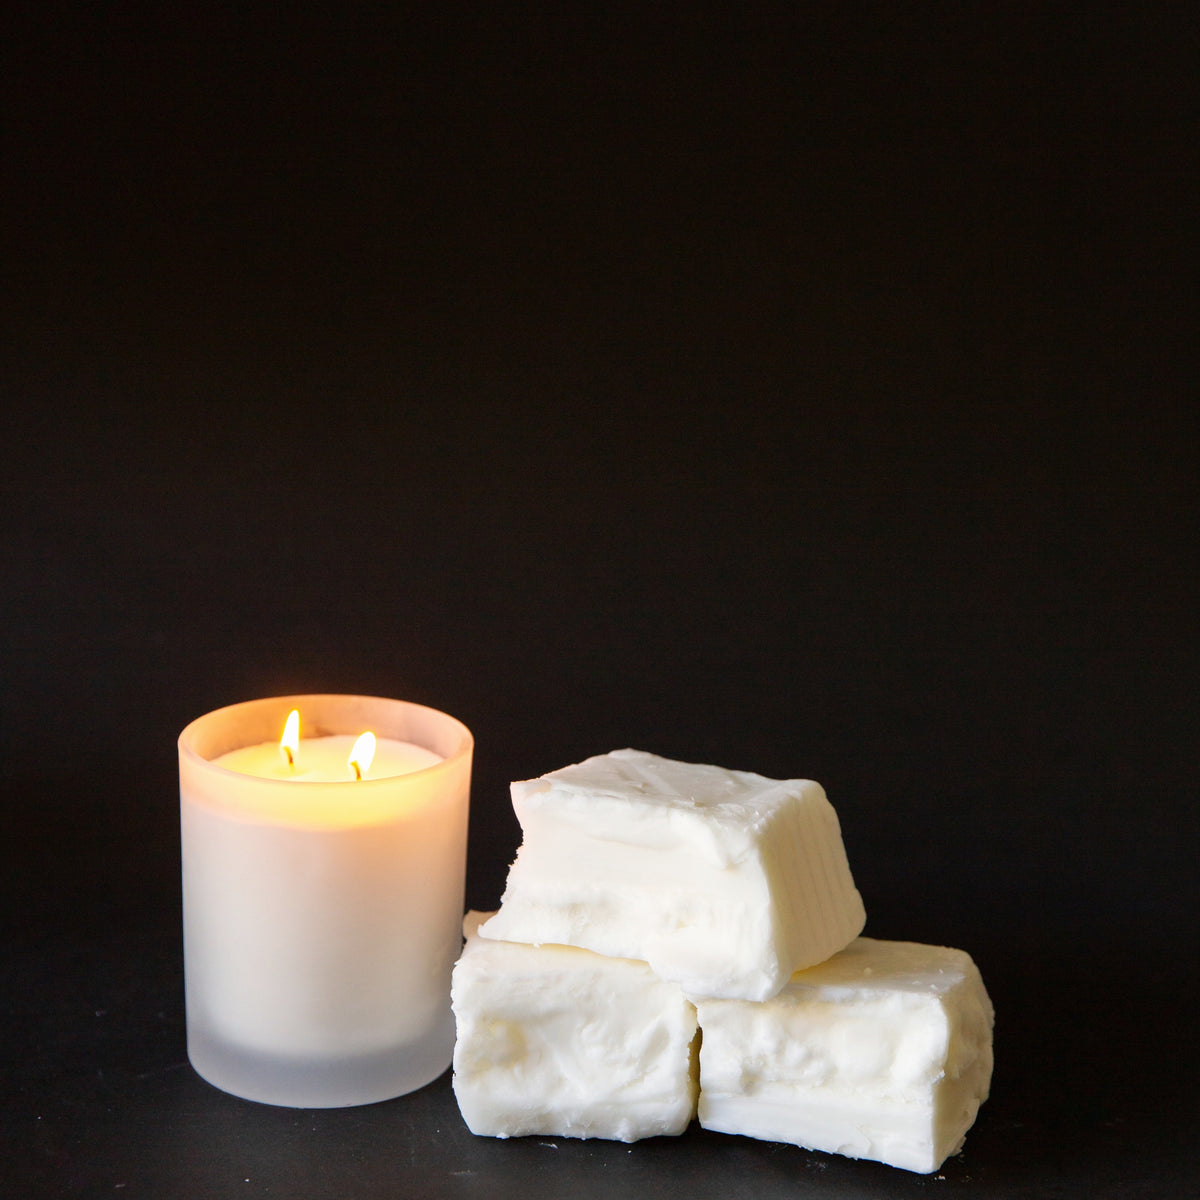 Coconut Apricot Candle Wax | Northwood Candle Supply 9 Slab Case (approx 45lb)